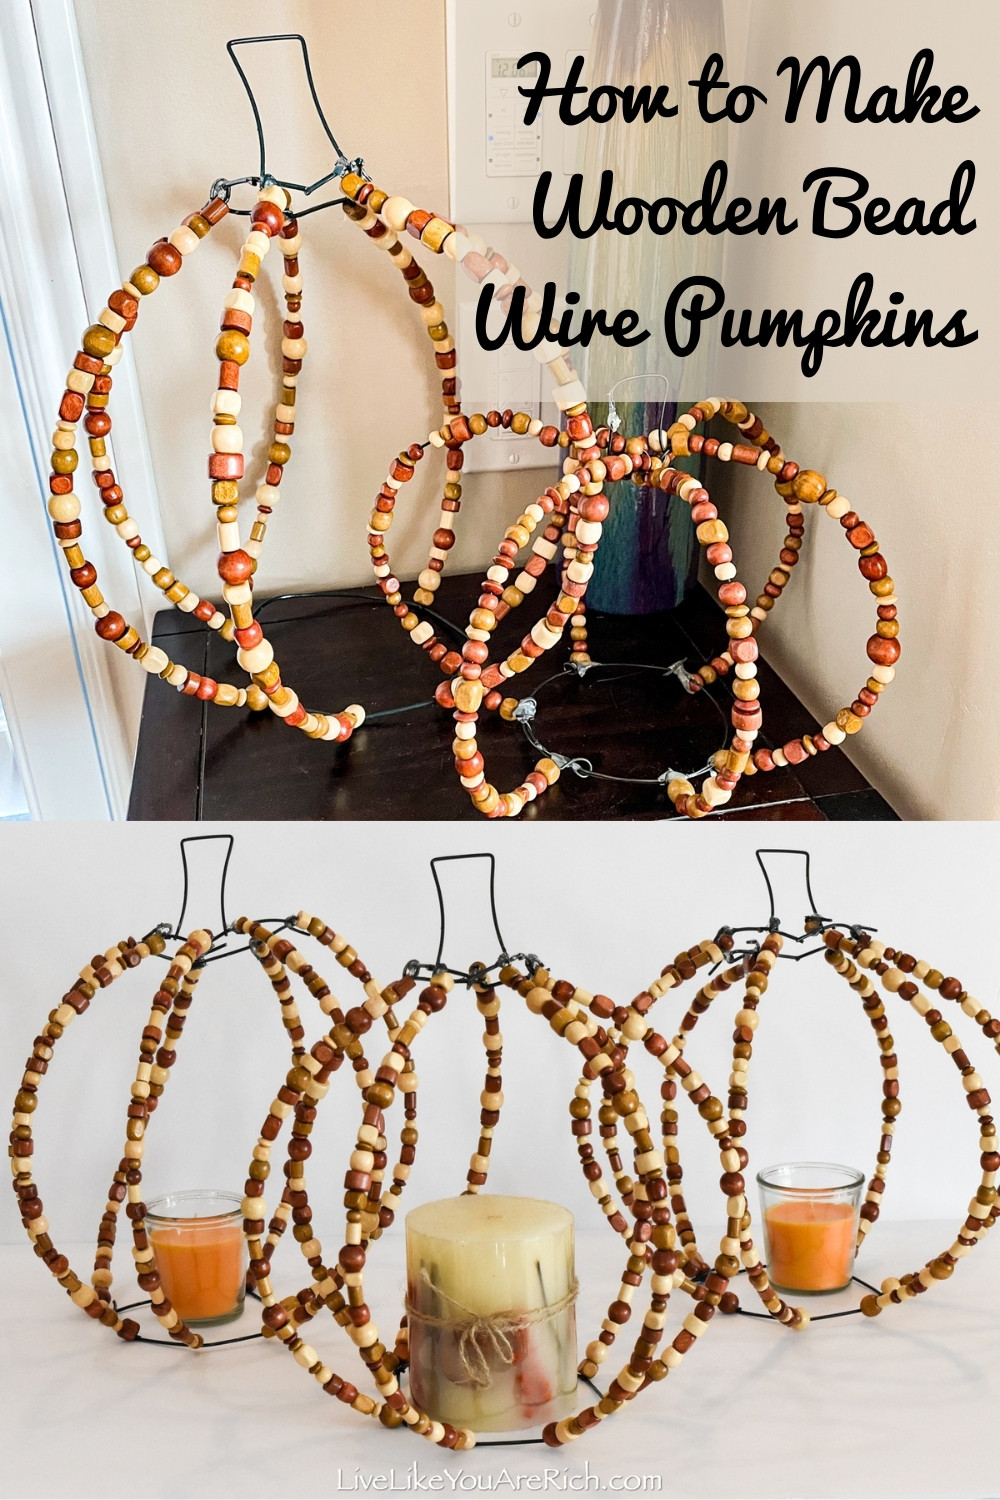 How to Make Wooden Bead Wire Pumpkins